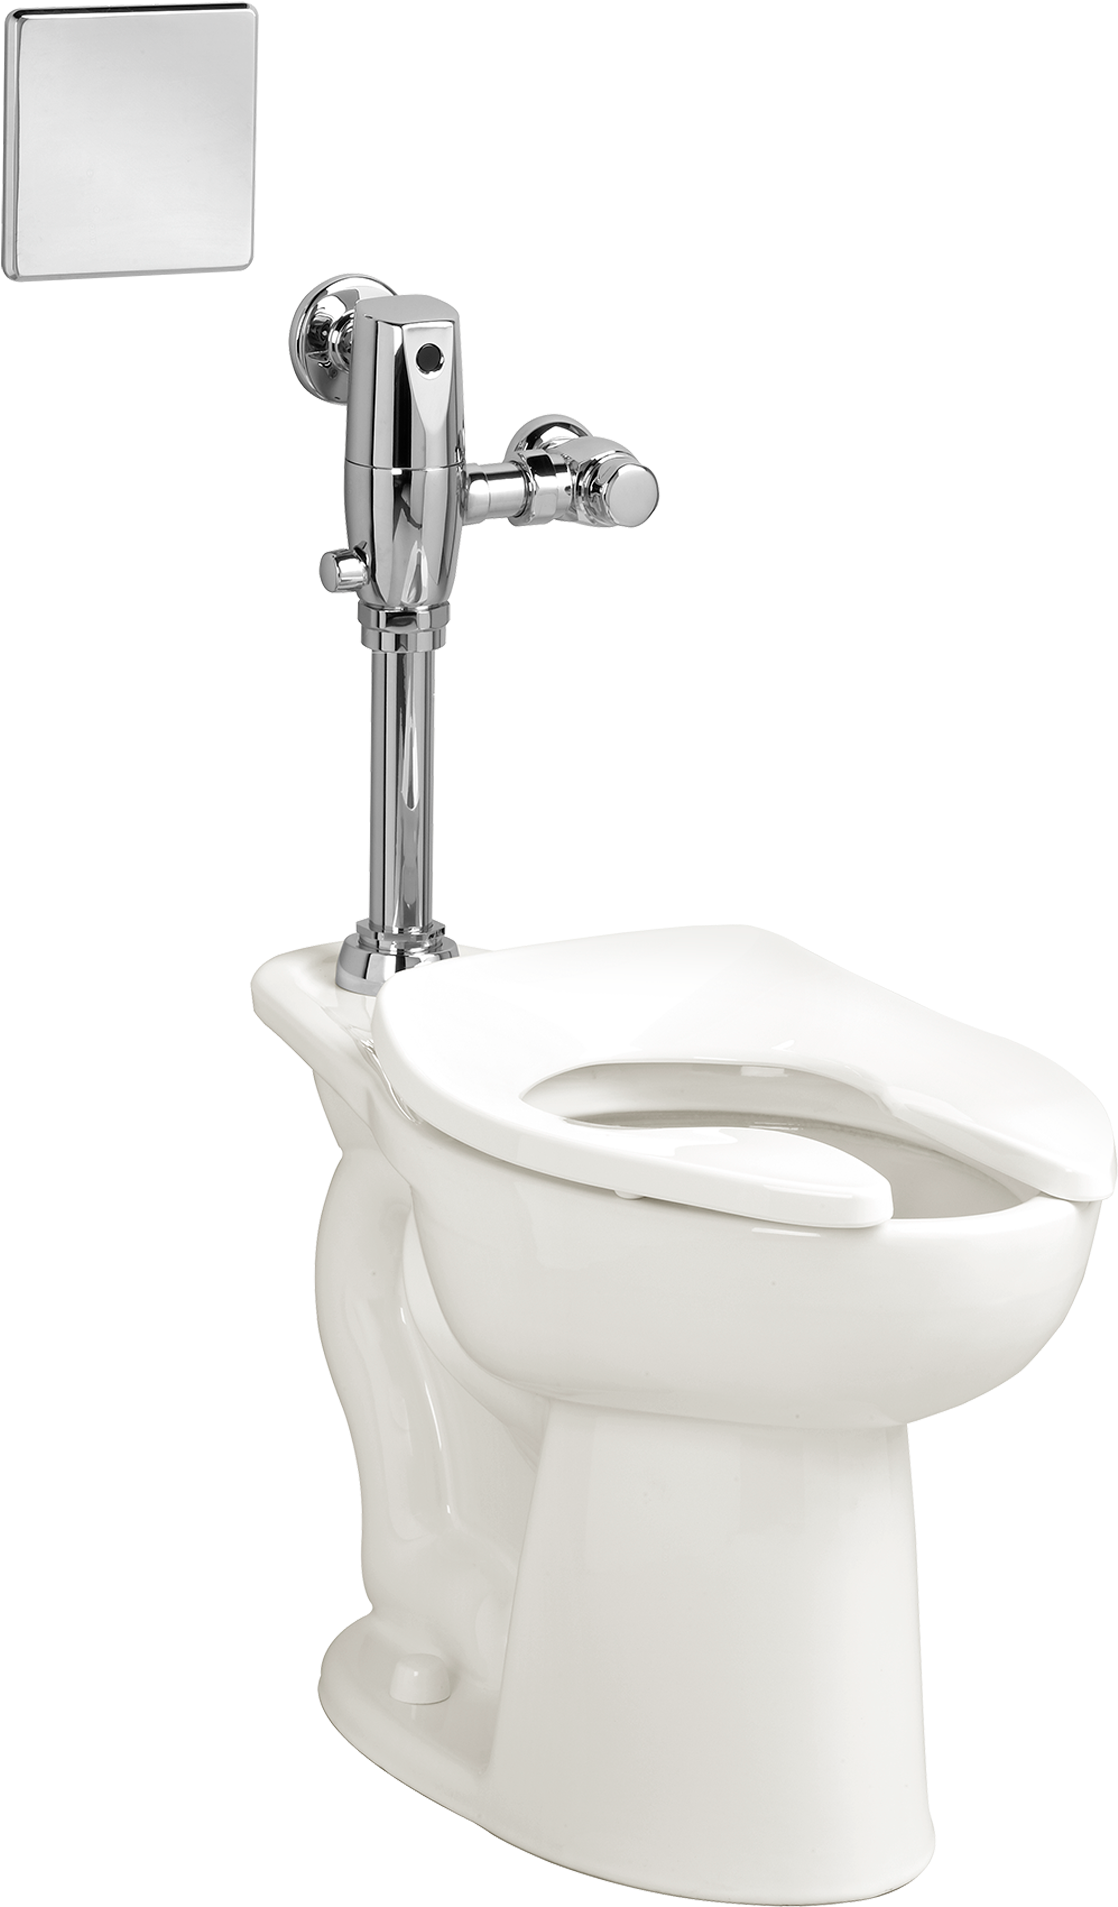 28 Gpf Toilet With Selectronic Exposed Ac Flush Valve - Toilet Bowl With Flush Price (2000x2000), Png Download